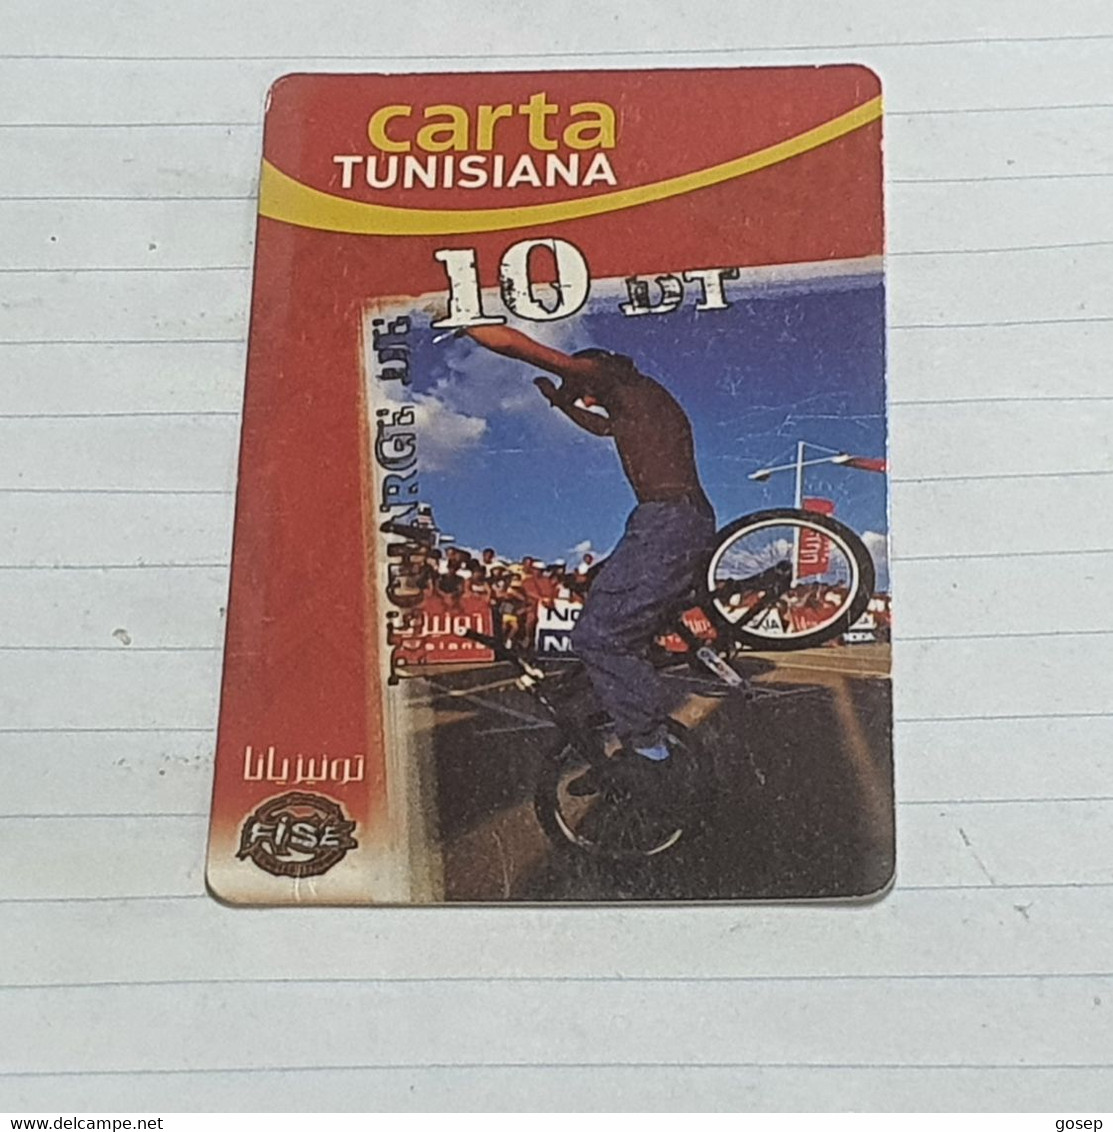 TUNISIA-(TUN-REF-TUN-20)-sport Extrem7-(116)-(8919-119-6551-751)(look From Out Side Card Barcode)-used Card - Tunisie